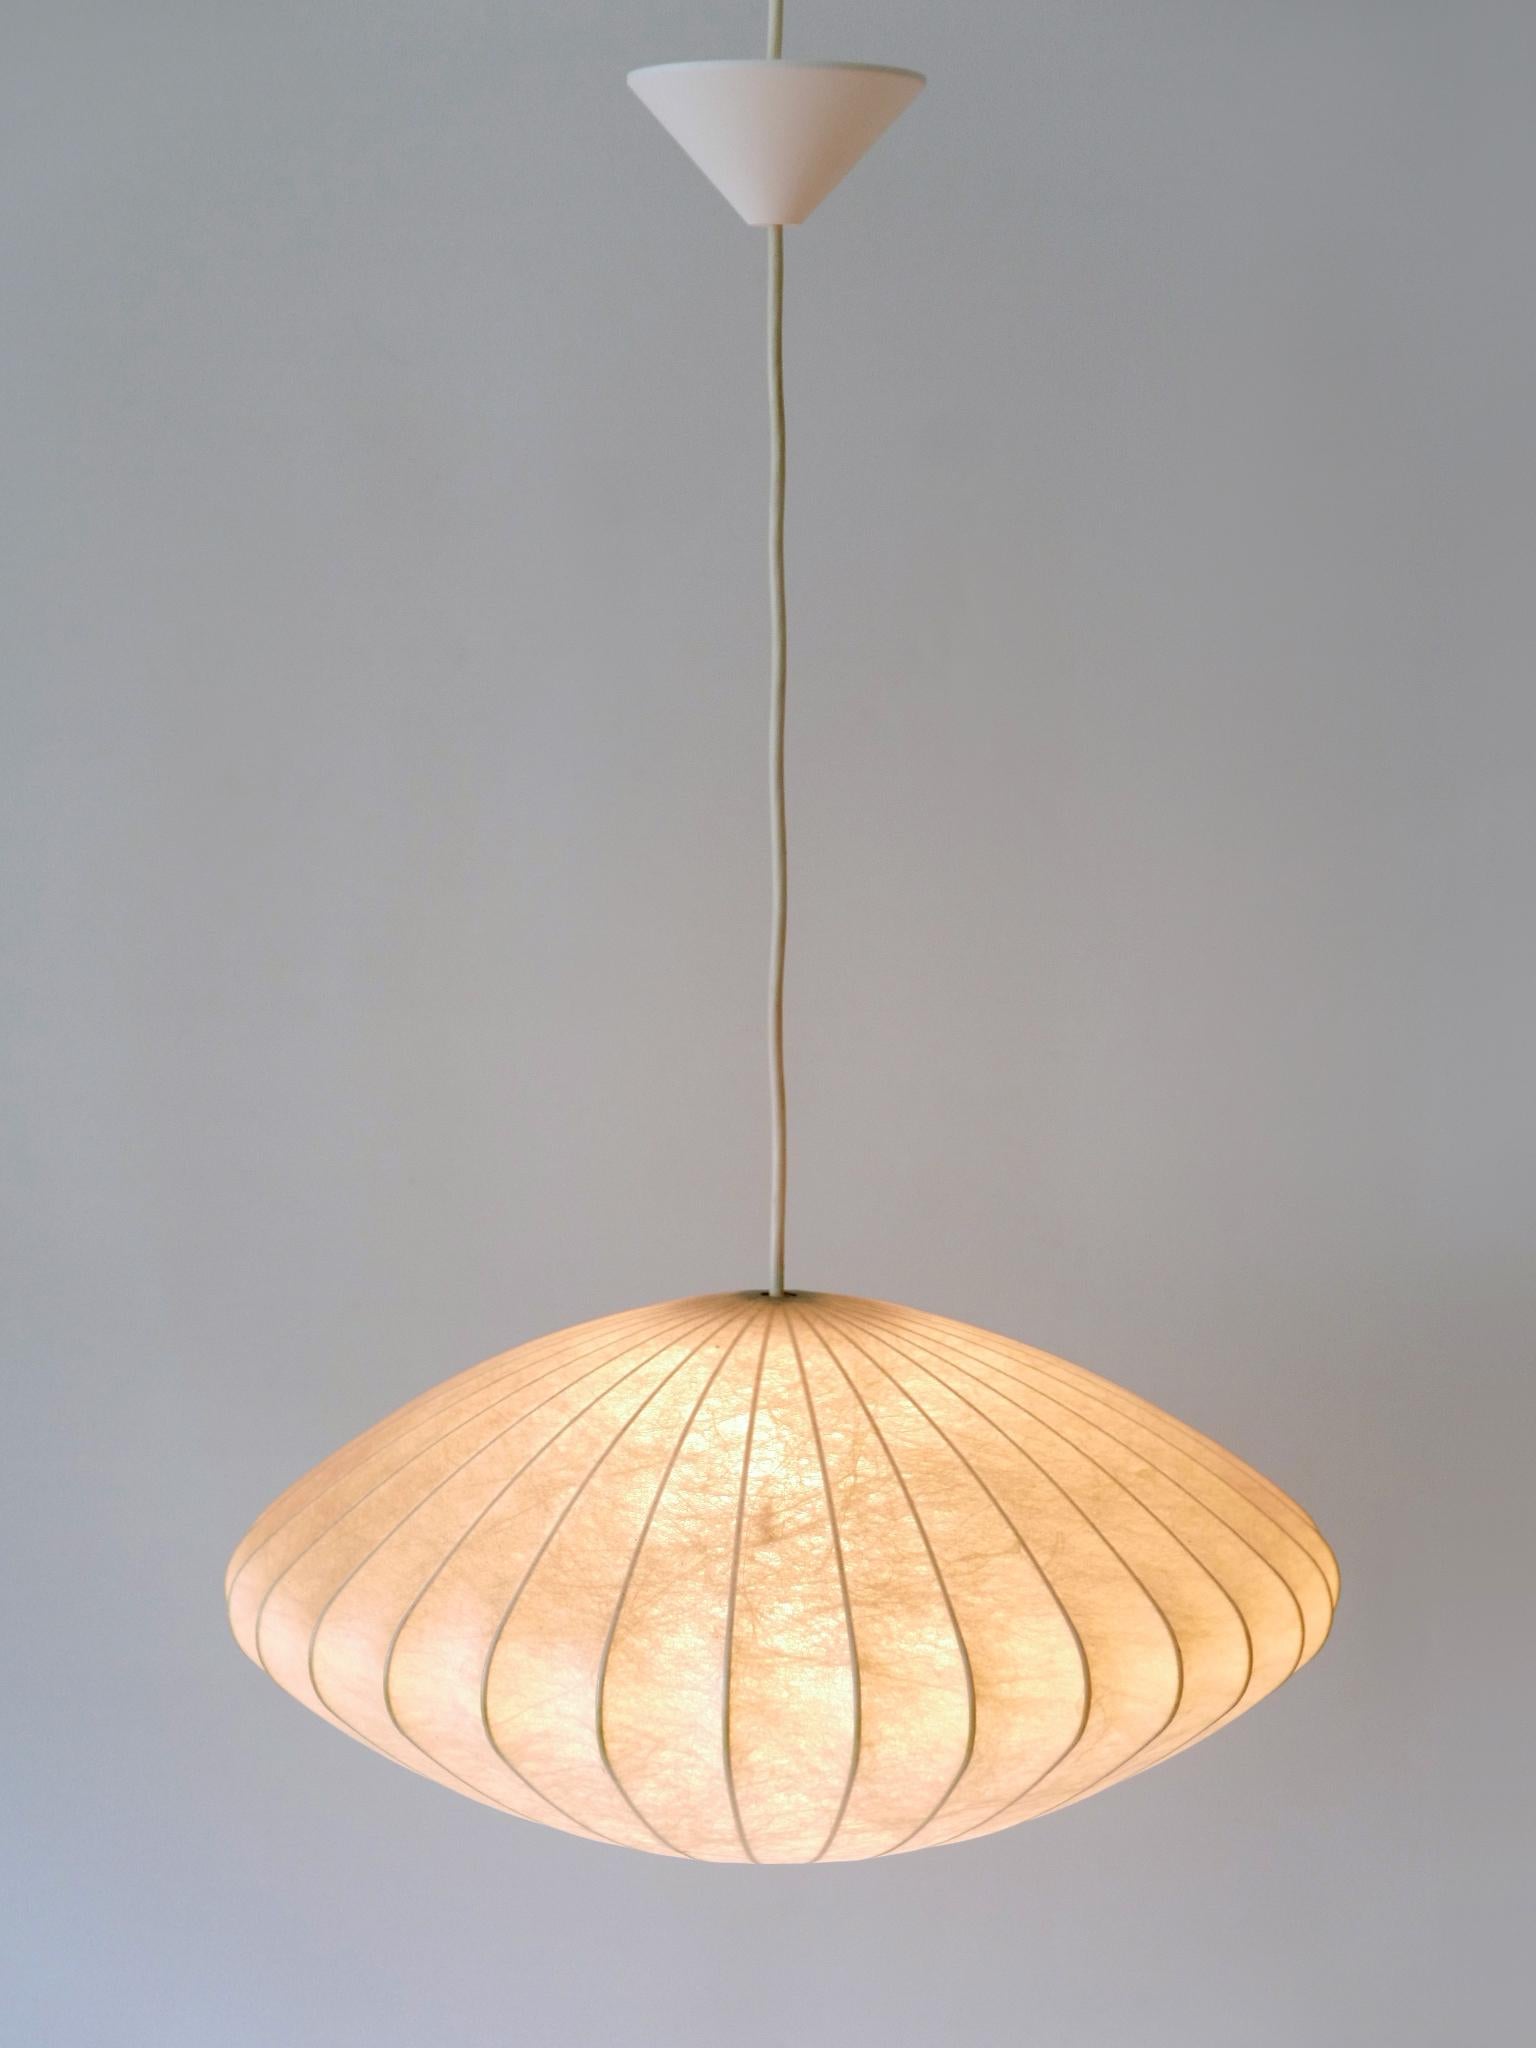 Rare Mid-Century Modern Cocoon Pendant Lamp or Hanging Light by Goldkant 1960s For Sale 7